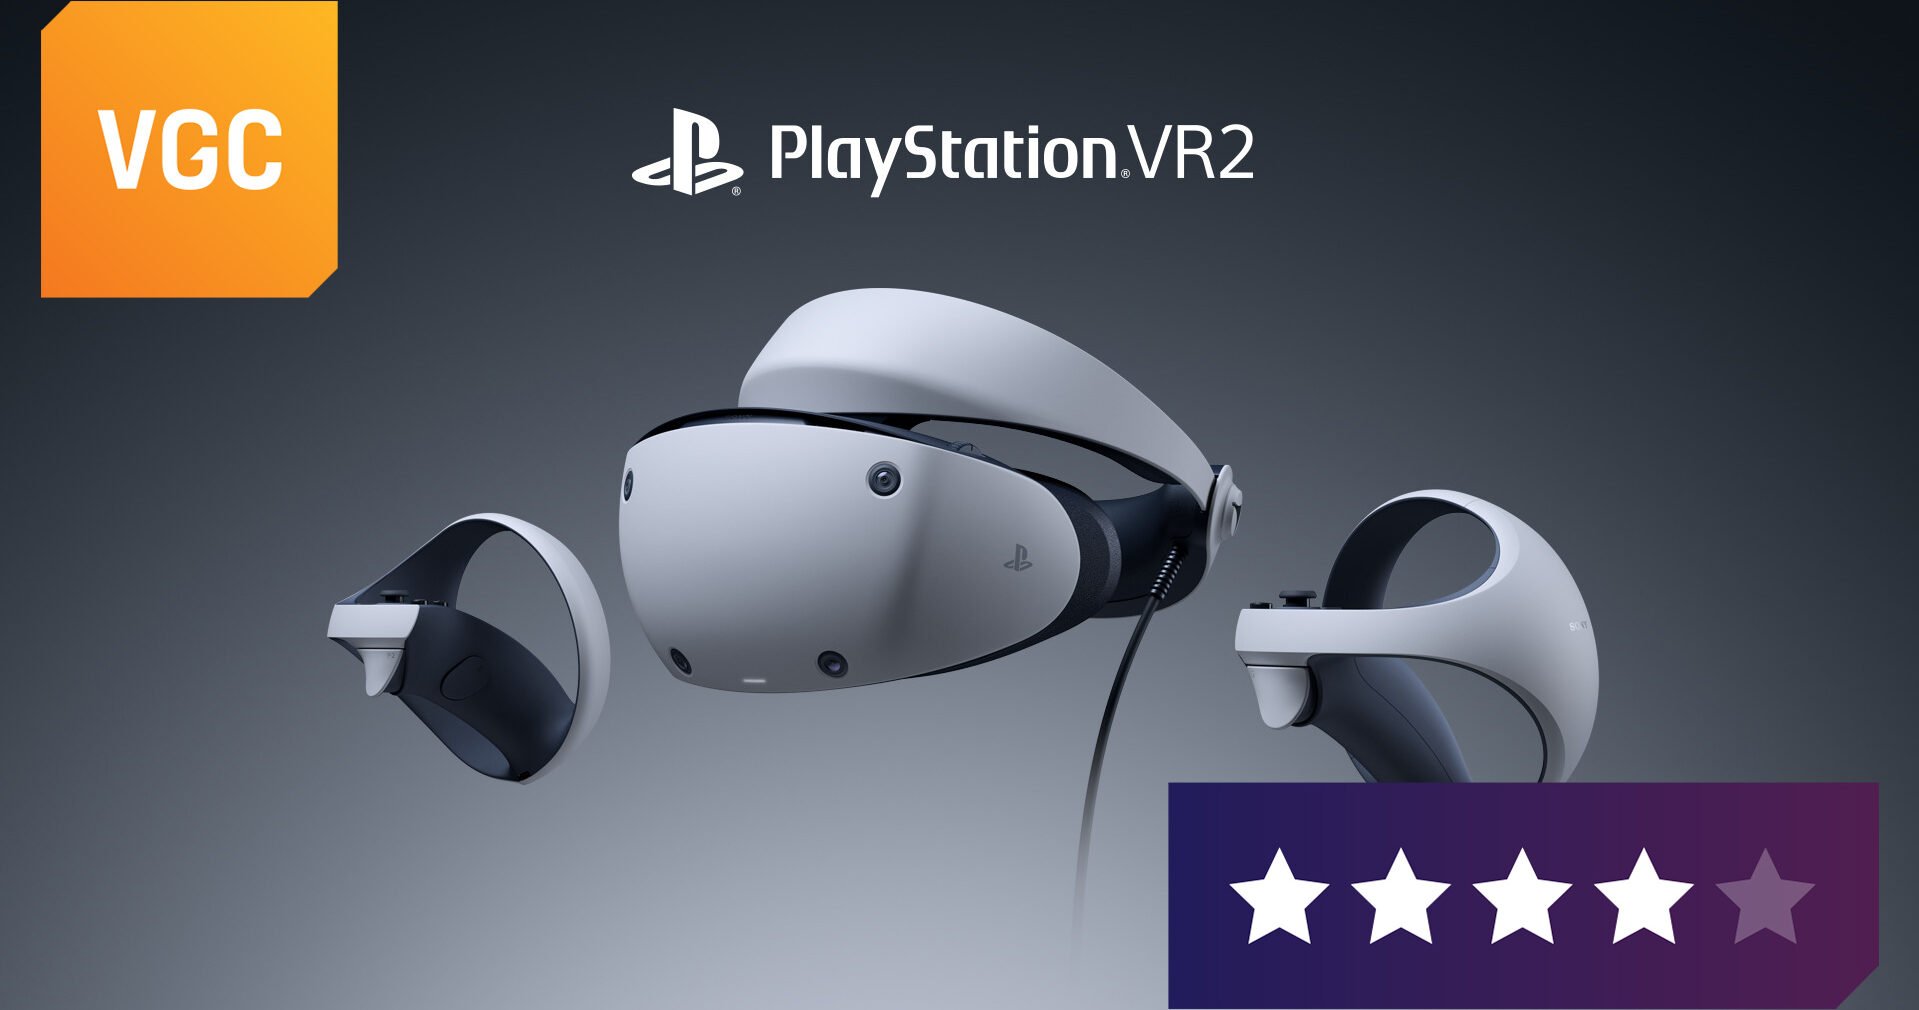 Review: PlayStation VR2 is an incredible headset, but with few killer games  right now